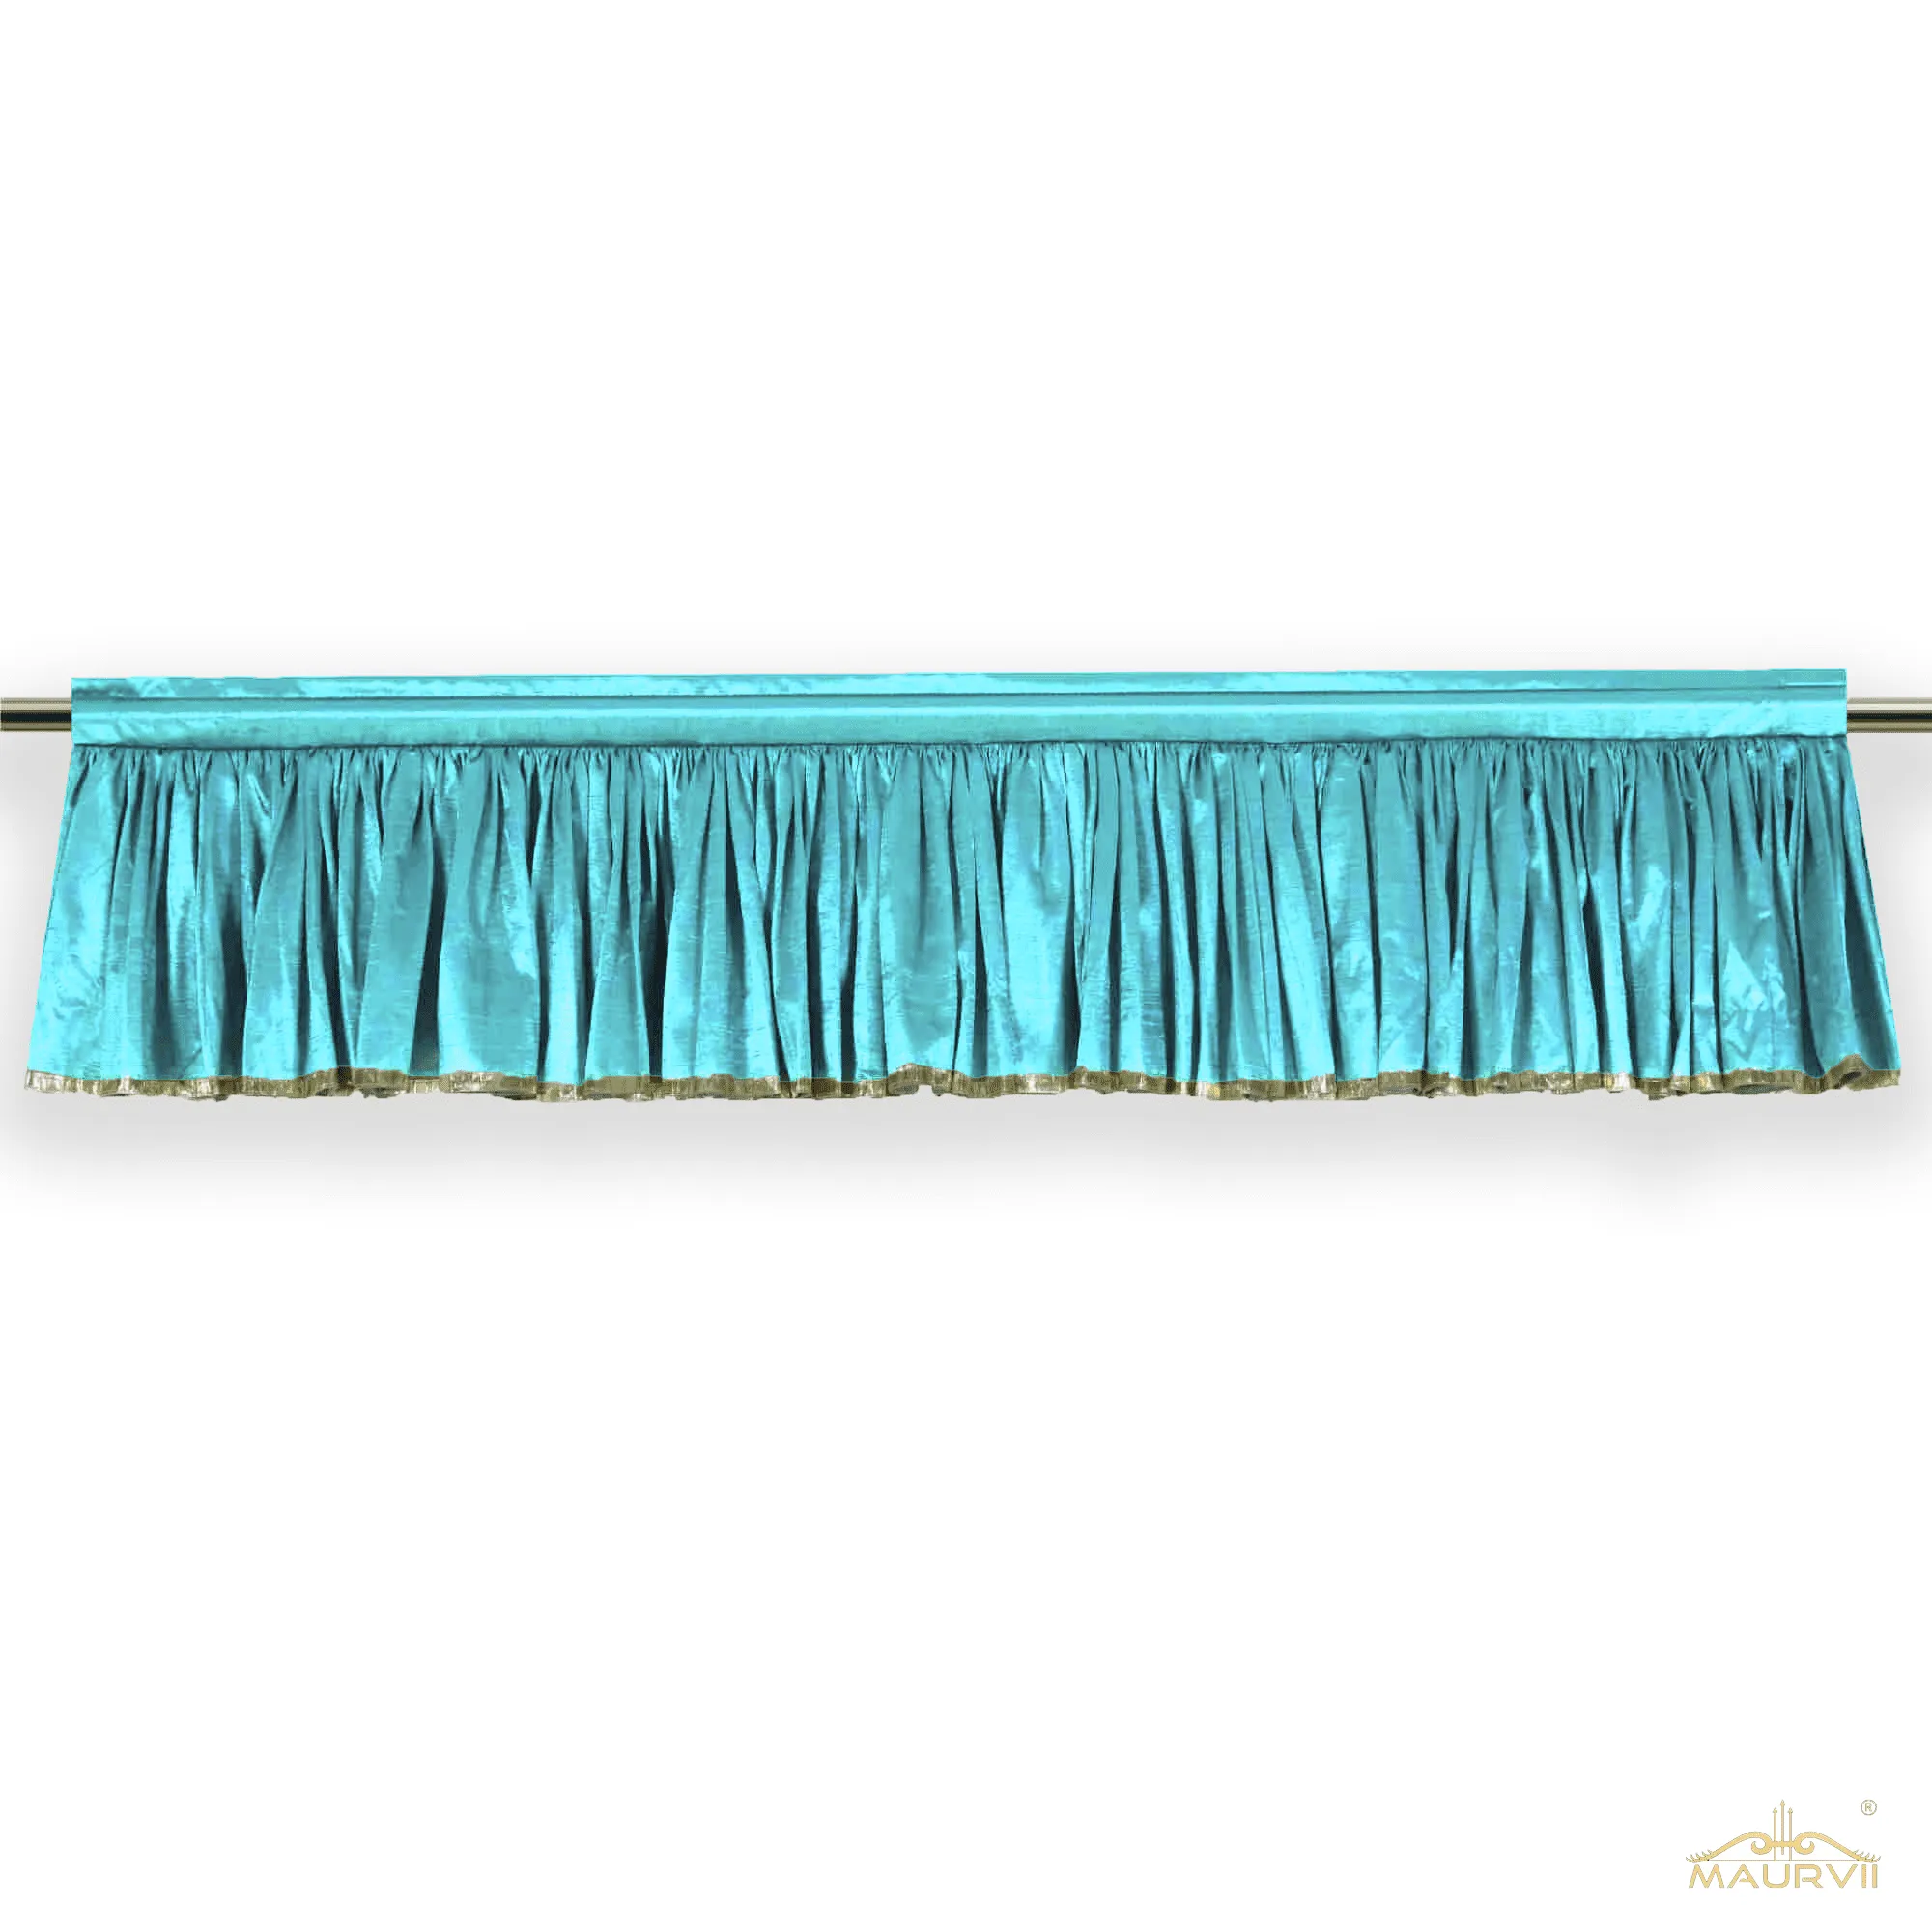 Rust Pleated Valance with golden trim at bottom